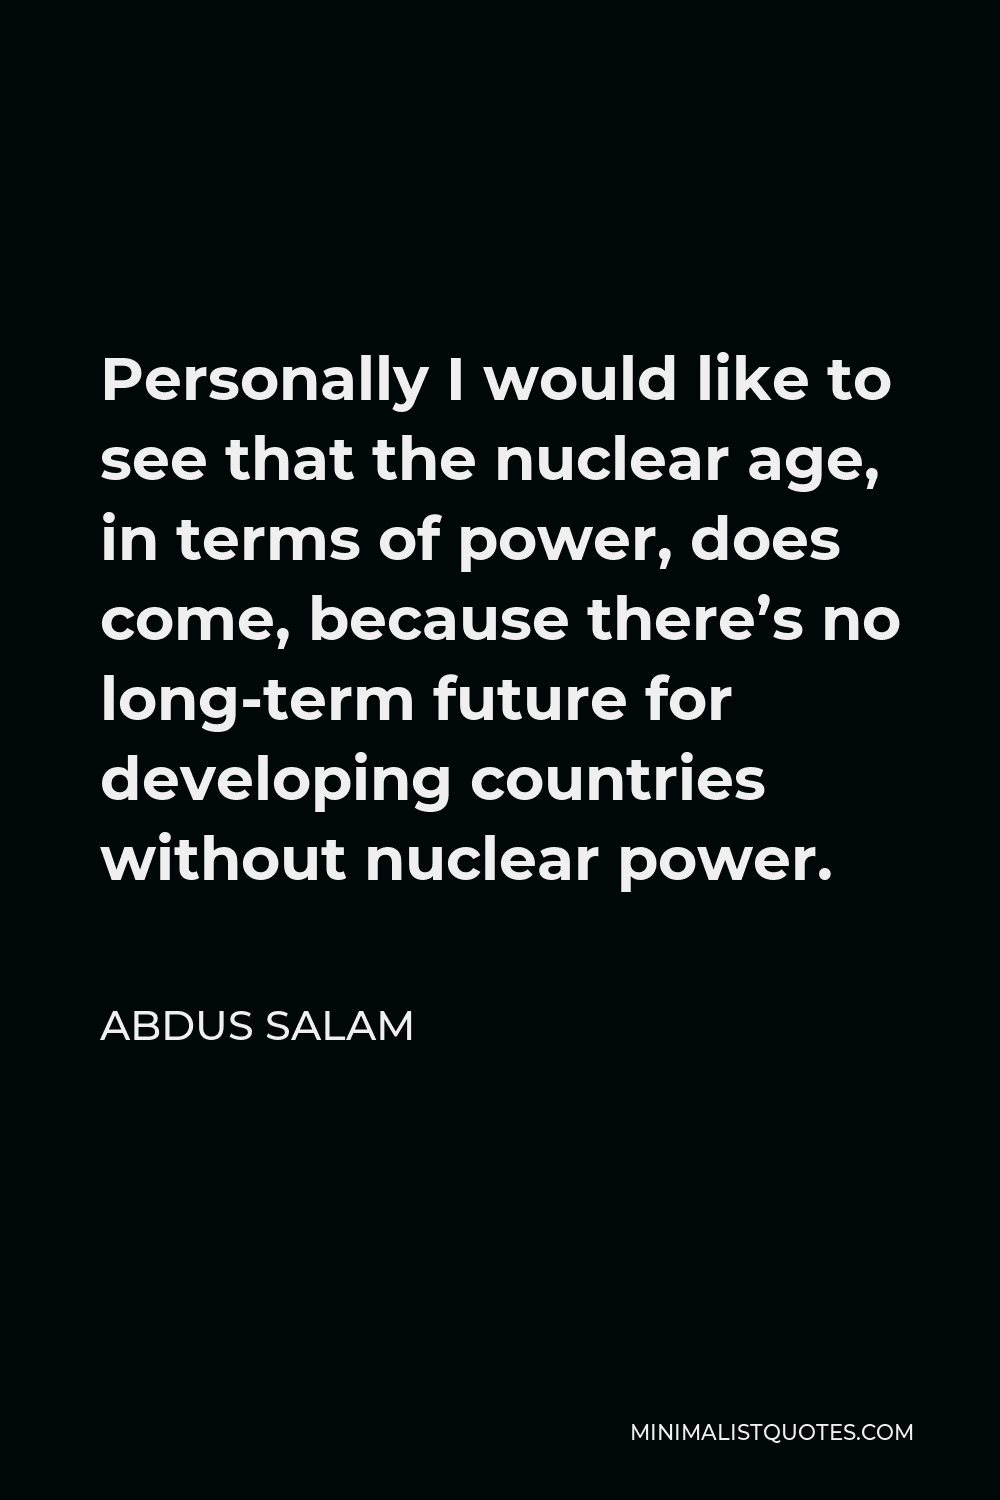 Abdus Salam Quote - Personally I would like to see that the nuclear age, in terms of power, does come, because there’s no long-term future for developing countries without nuclear power.